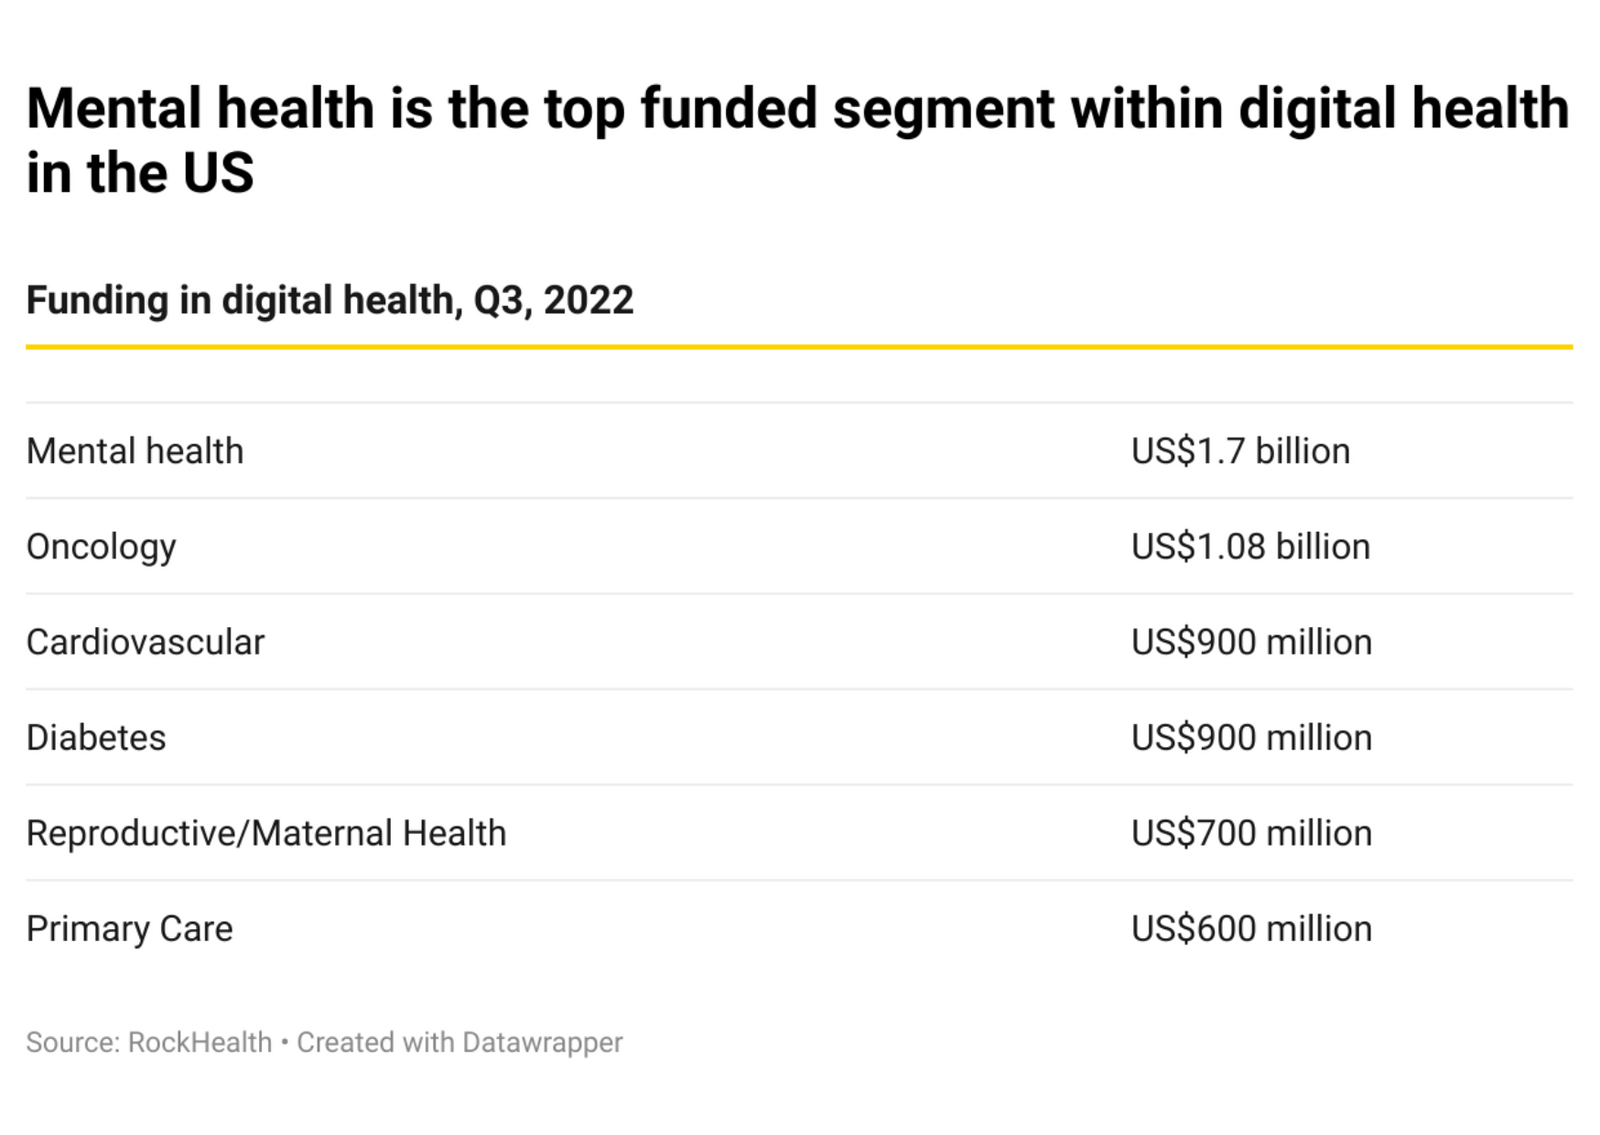 Mental health is the top funded clinical indication in digital health innovations, at US$1.7 billion, beating oncology and cardiovascular interventions.